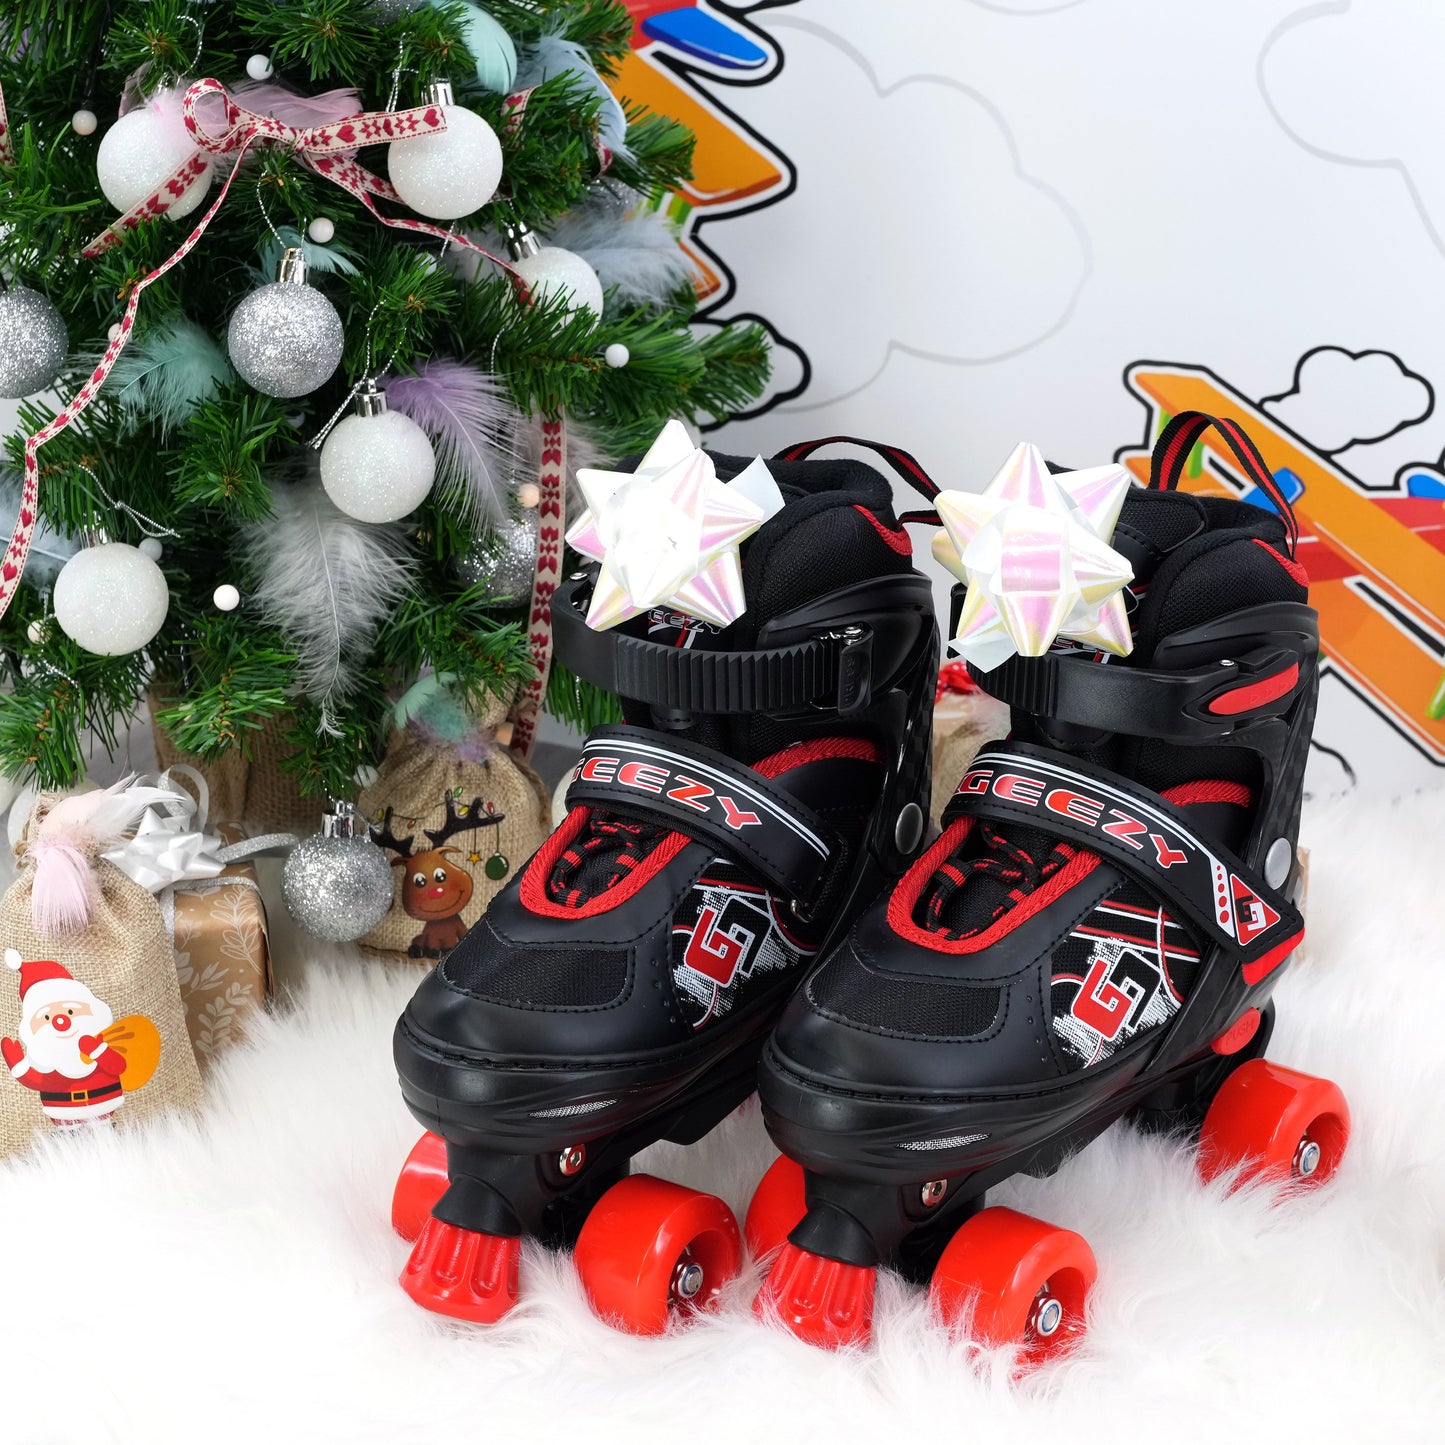 The Magic Toy Shop Roller Skate Red and Black Roller Skates for Kids with 4 Wheel